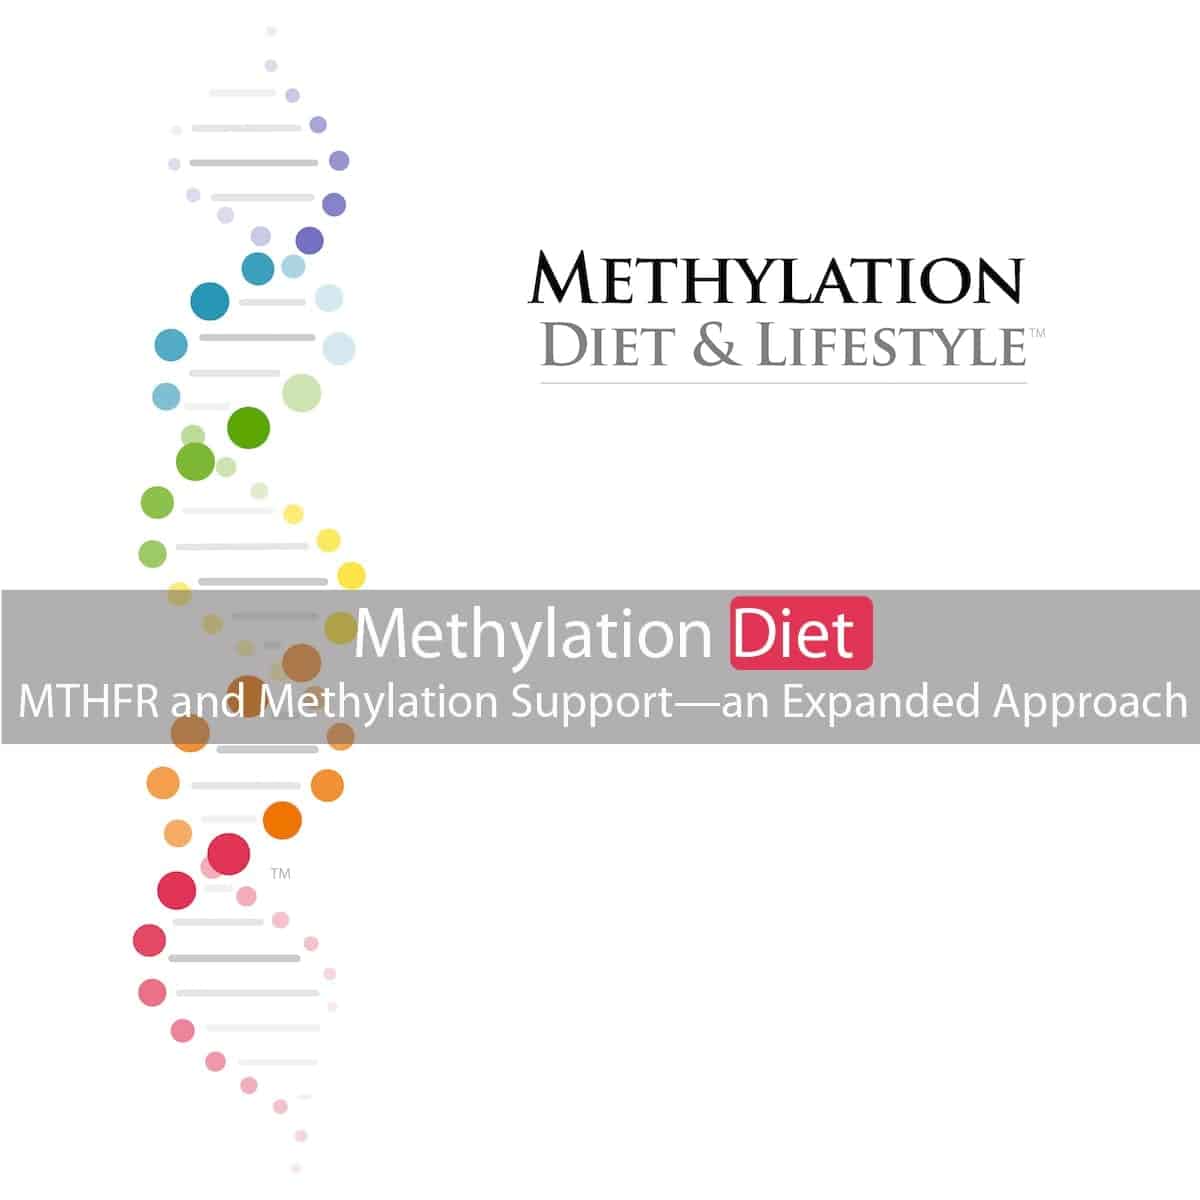 The Methylation Diet and MTHFR